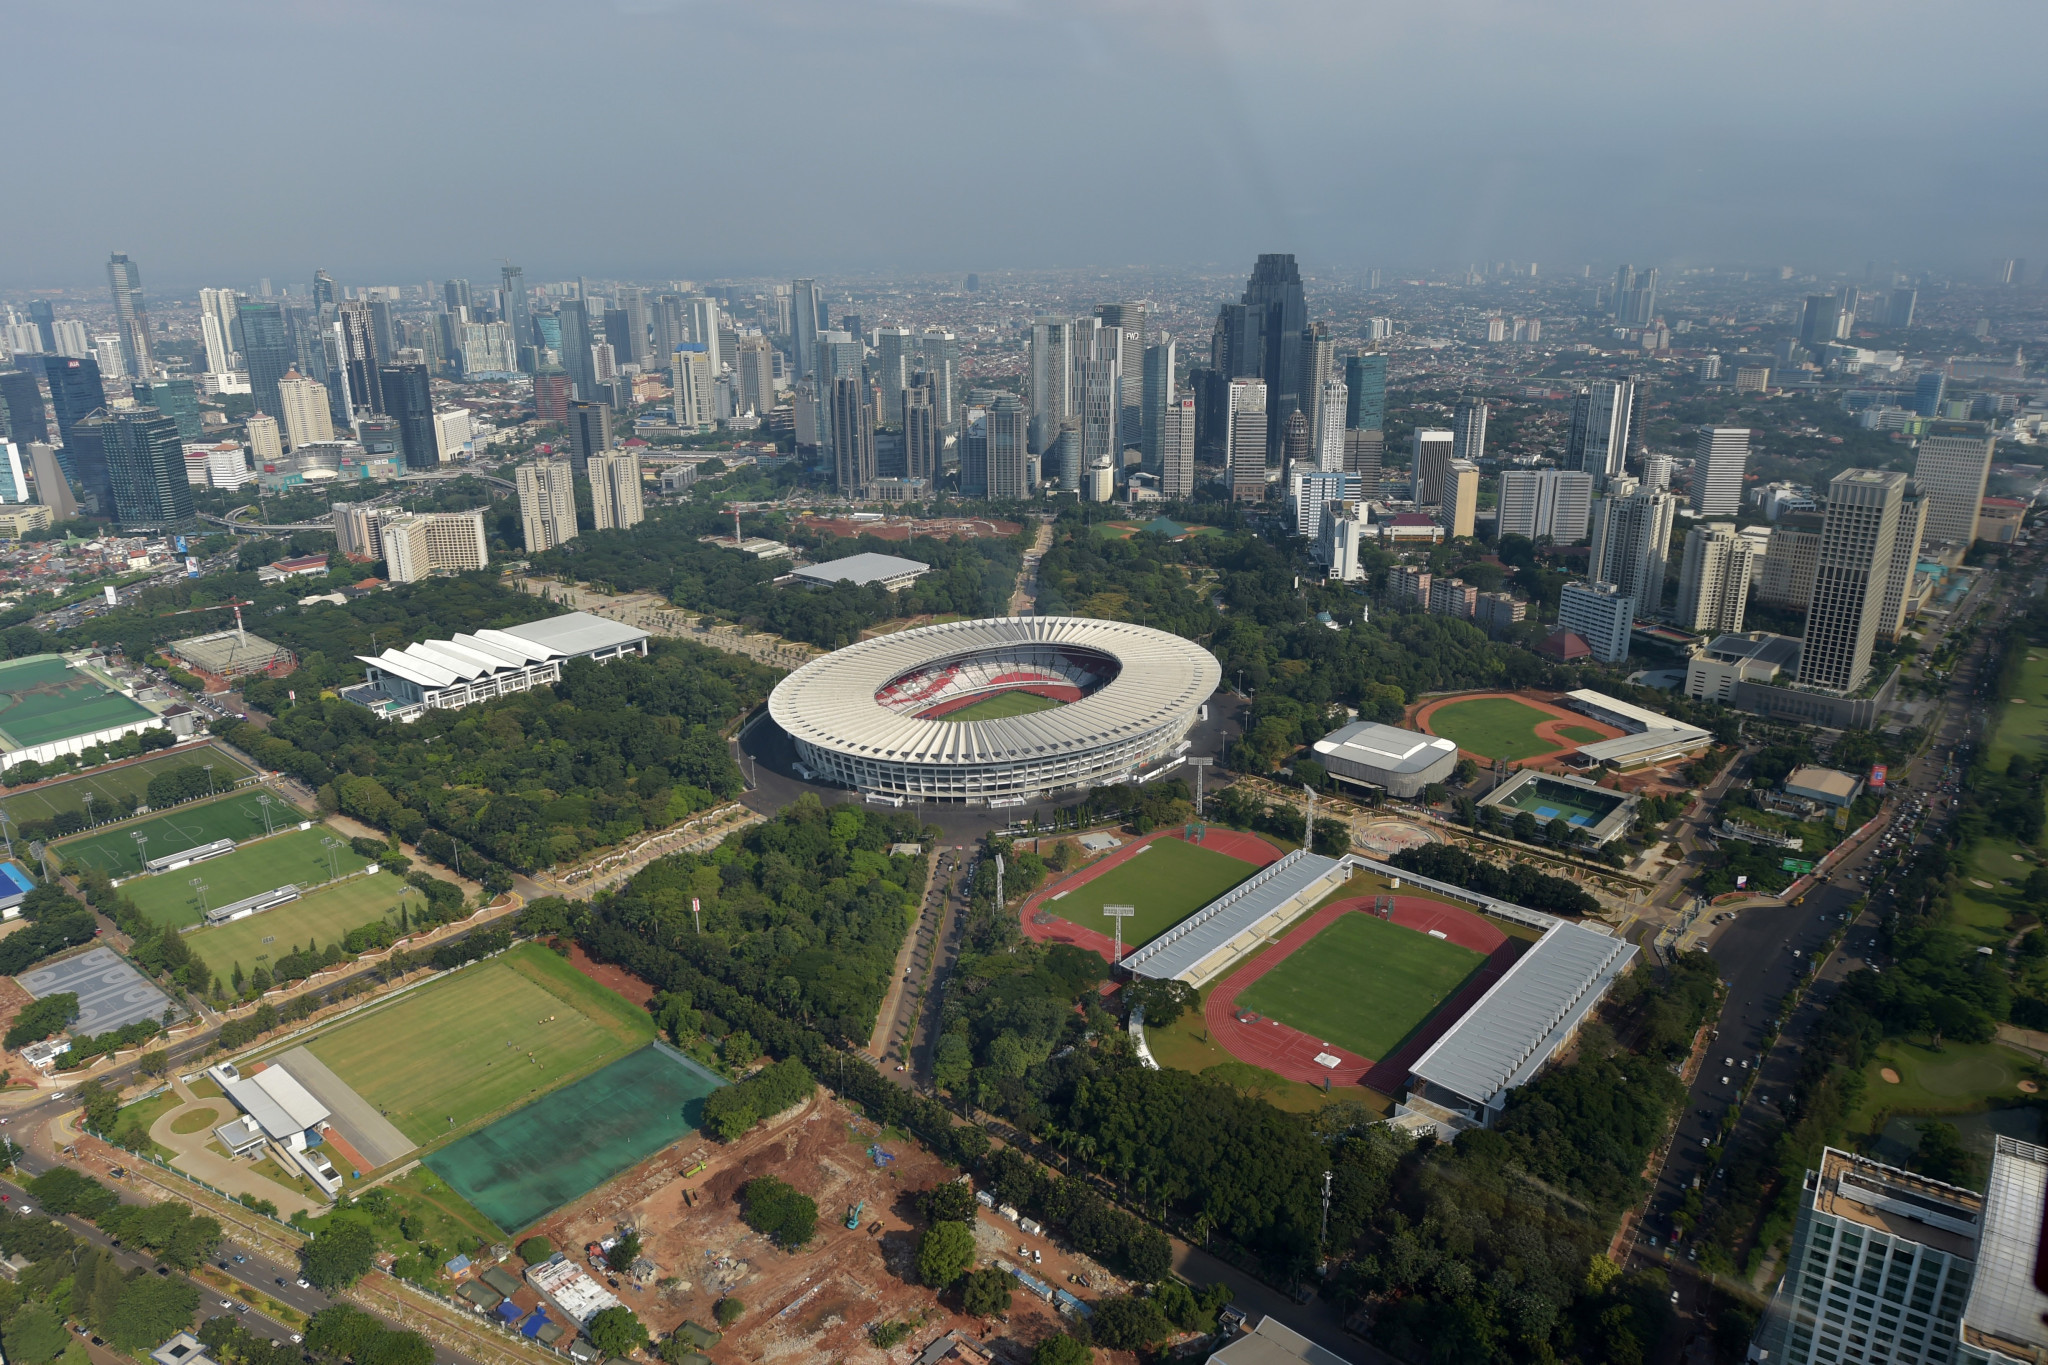 OCA praise preparations for Jakarta Palembang 2018 Asian Games with 100 days to go